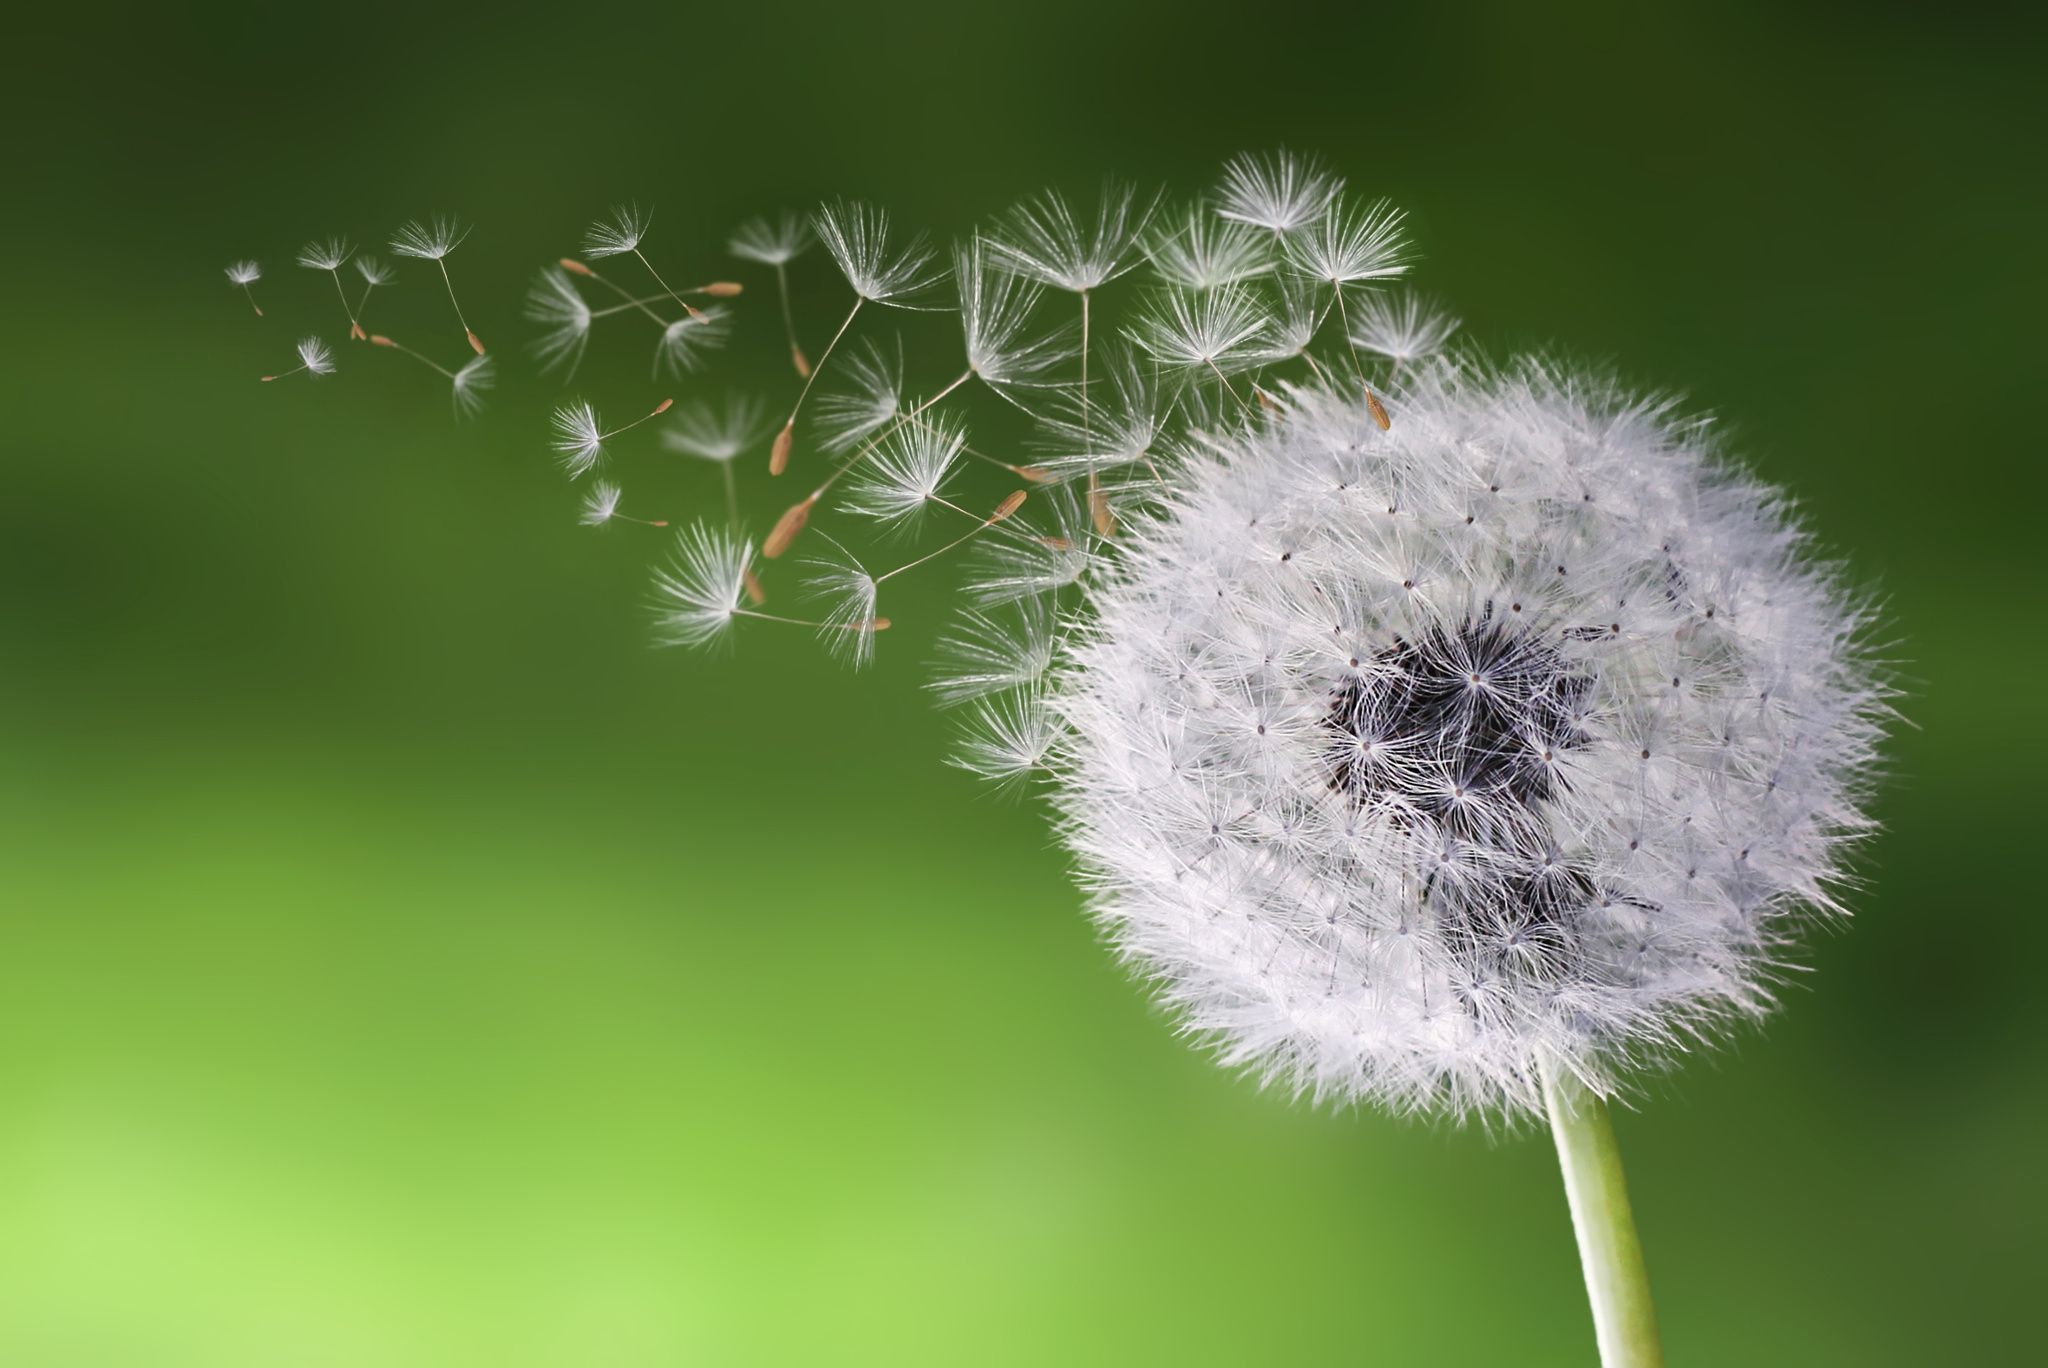 Dandelion clock in morning by Bess Hamiti on 500px | I'm a ...